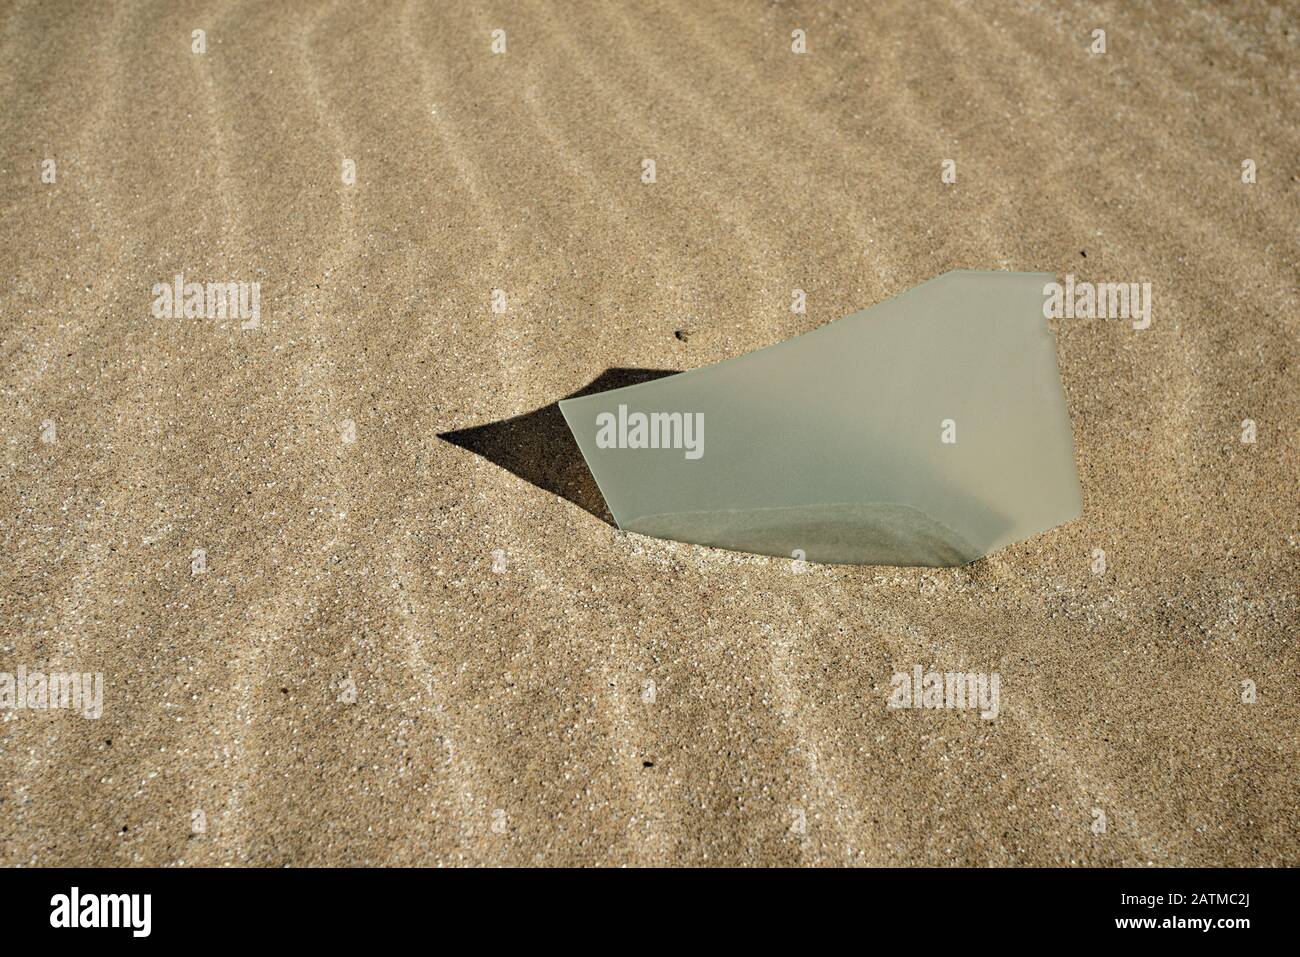 Cutting edge, jagged glass shard embedded in sand with shadow. Stock Photo